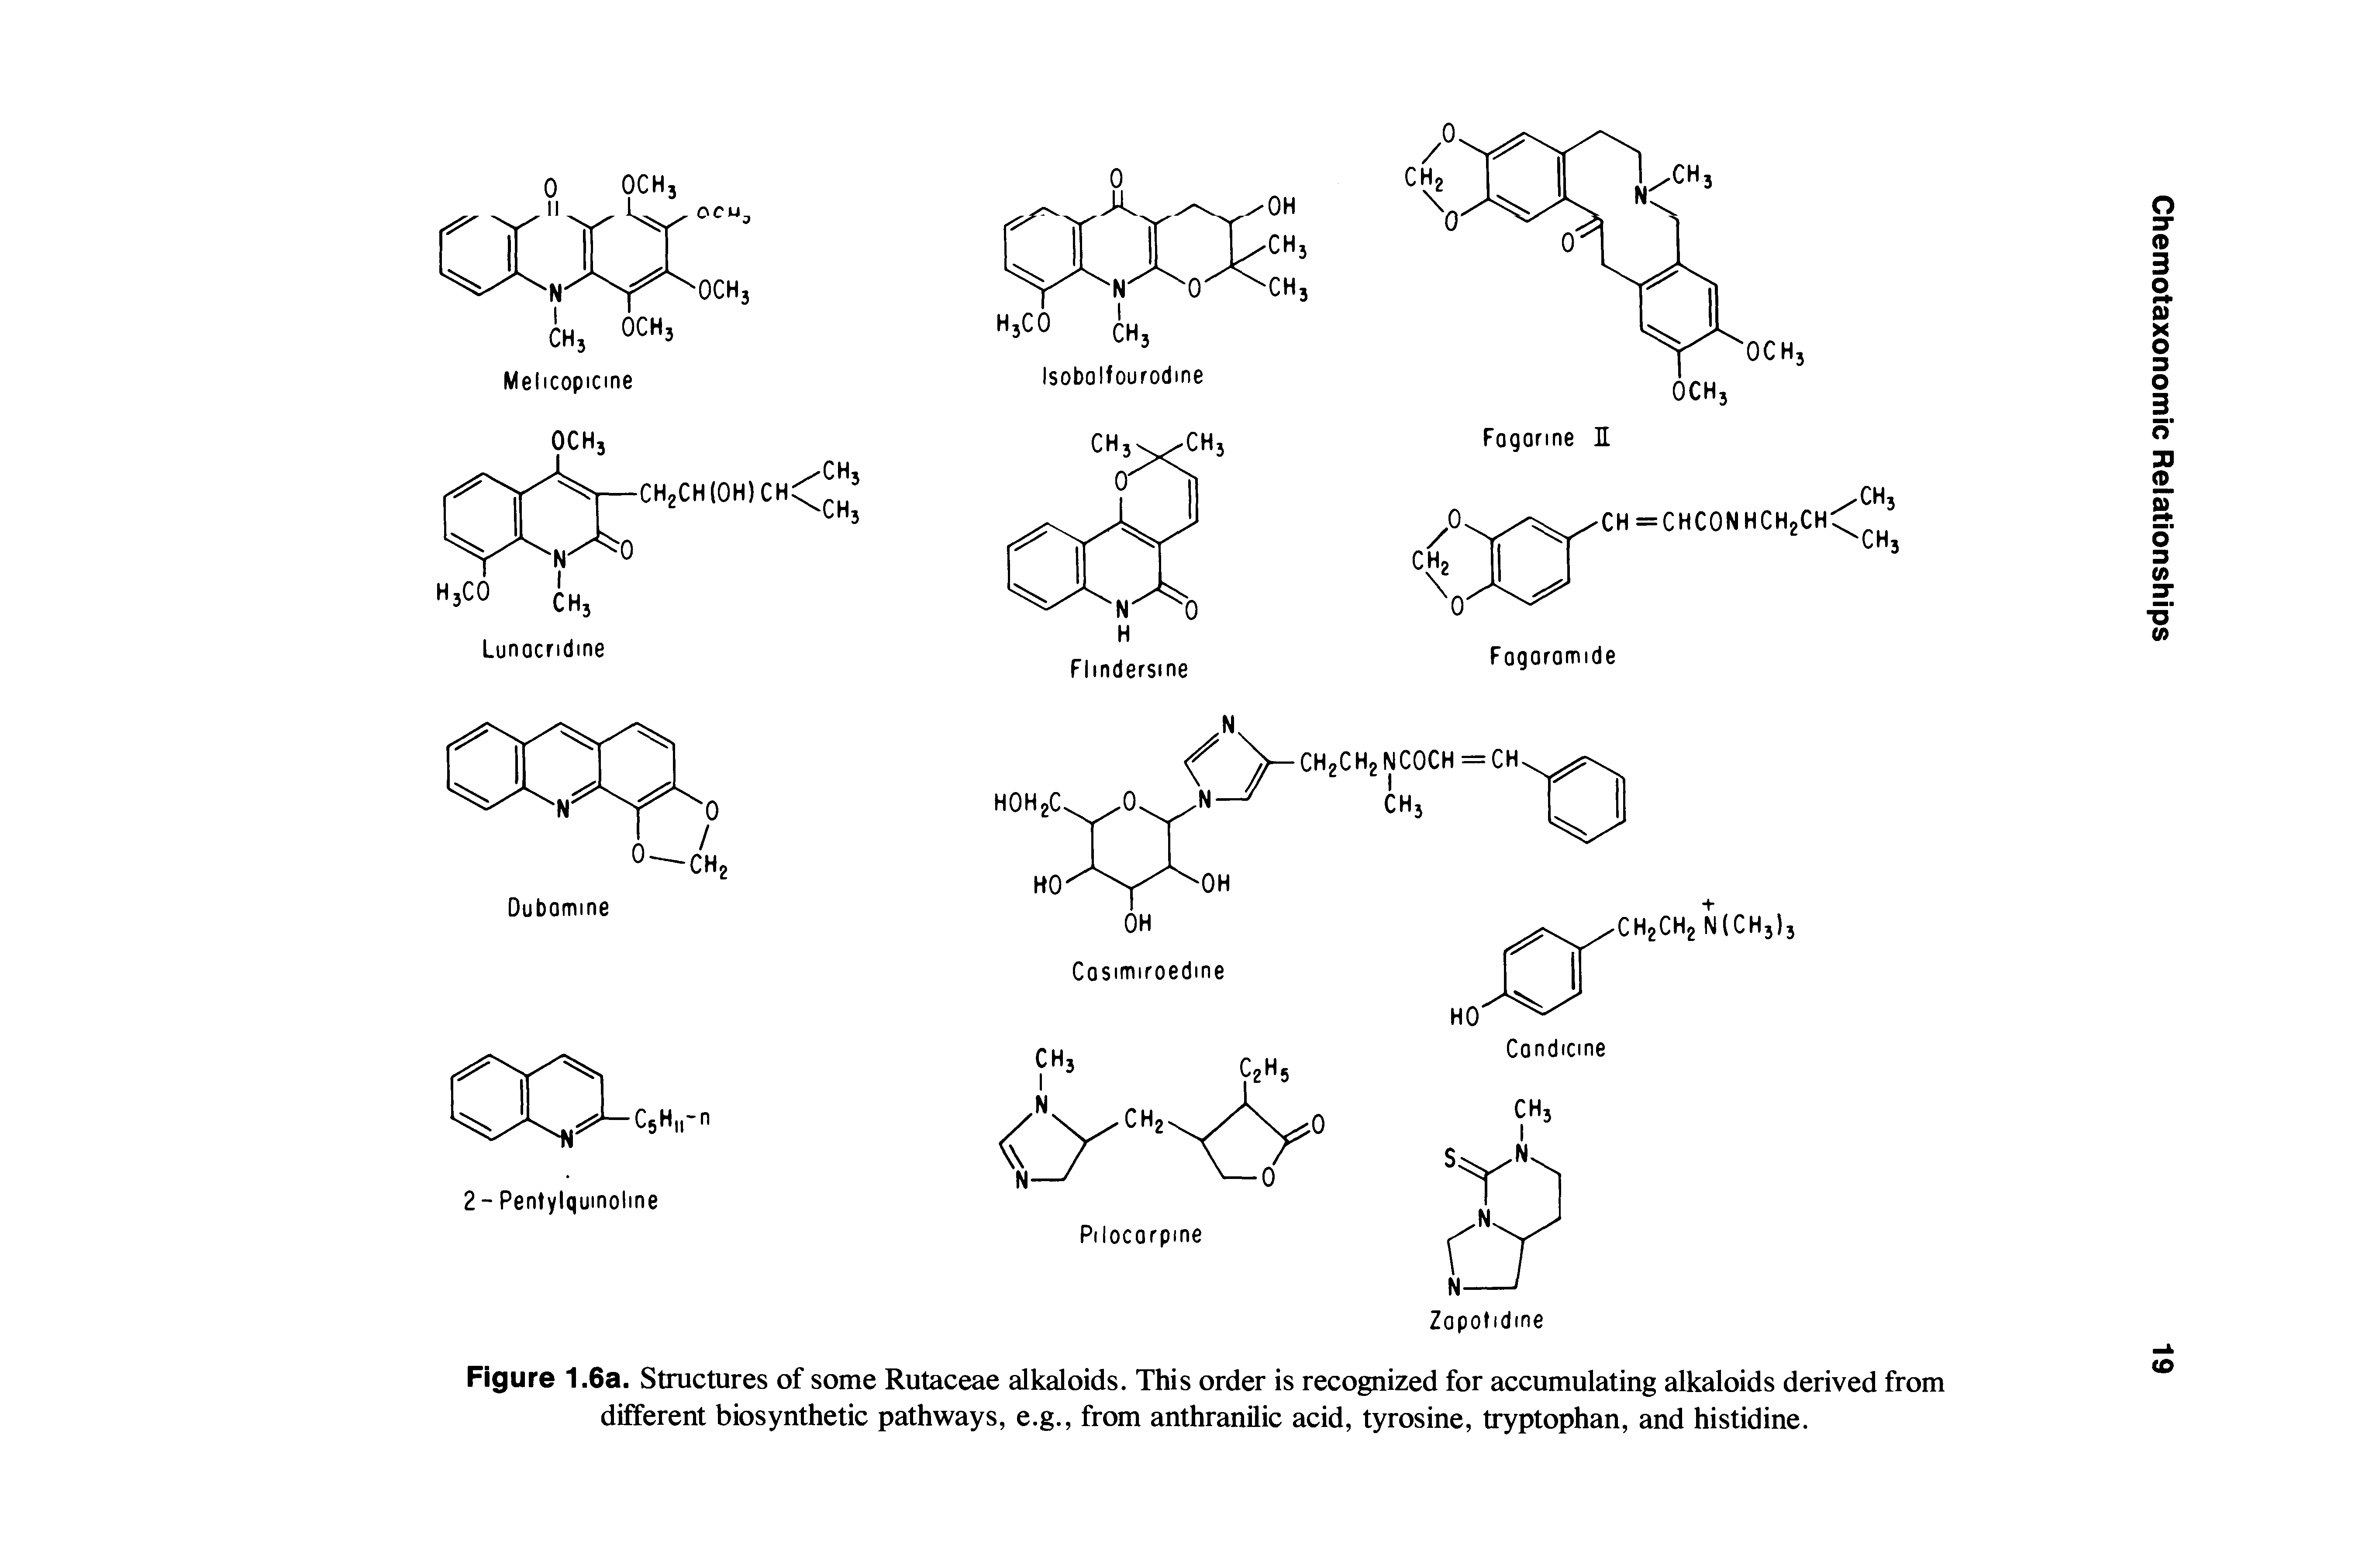 Figure 1.6a. Structures of some Rutaceae alkaloids. This order is recognized for accumulating alkaloids derived from different biosynthetic pathways, e.g., from anthranilic acid, tyrosine, tryptophan, and histidine.